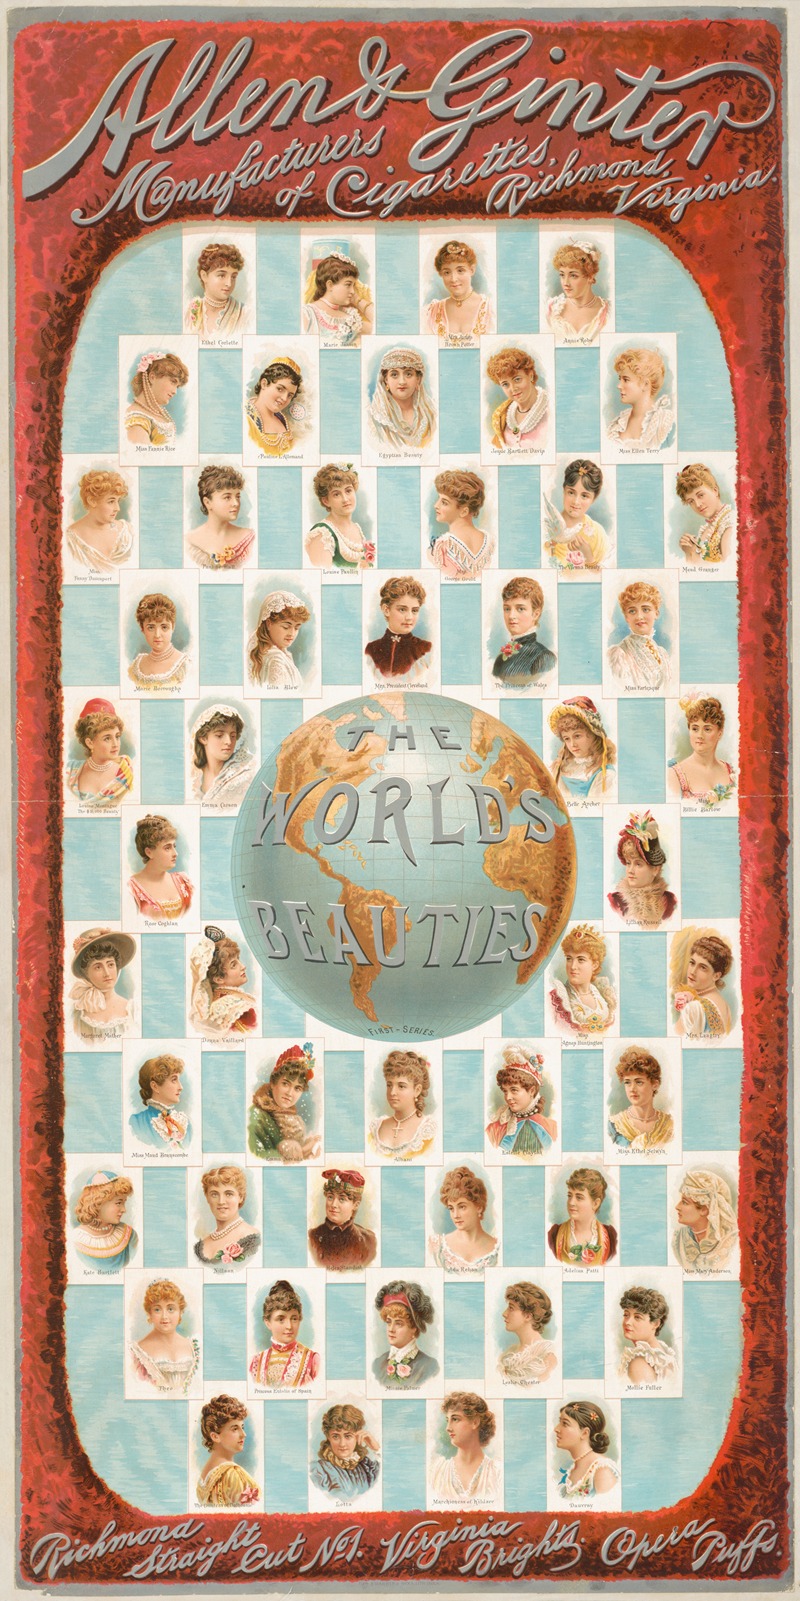 Geo. S. Harris & Sons - The world’s beauties, first-series, Allen & Ginter, manufacturers of cigarettes, Richmond, Virginia